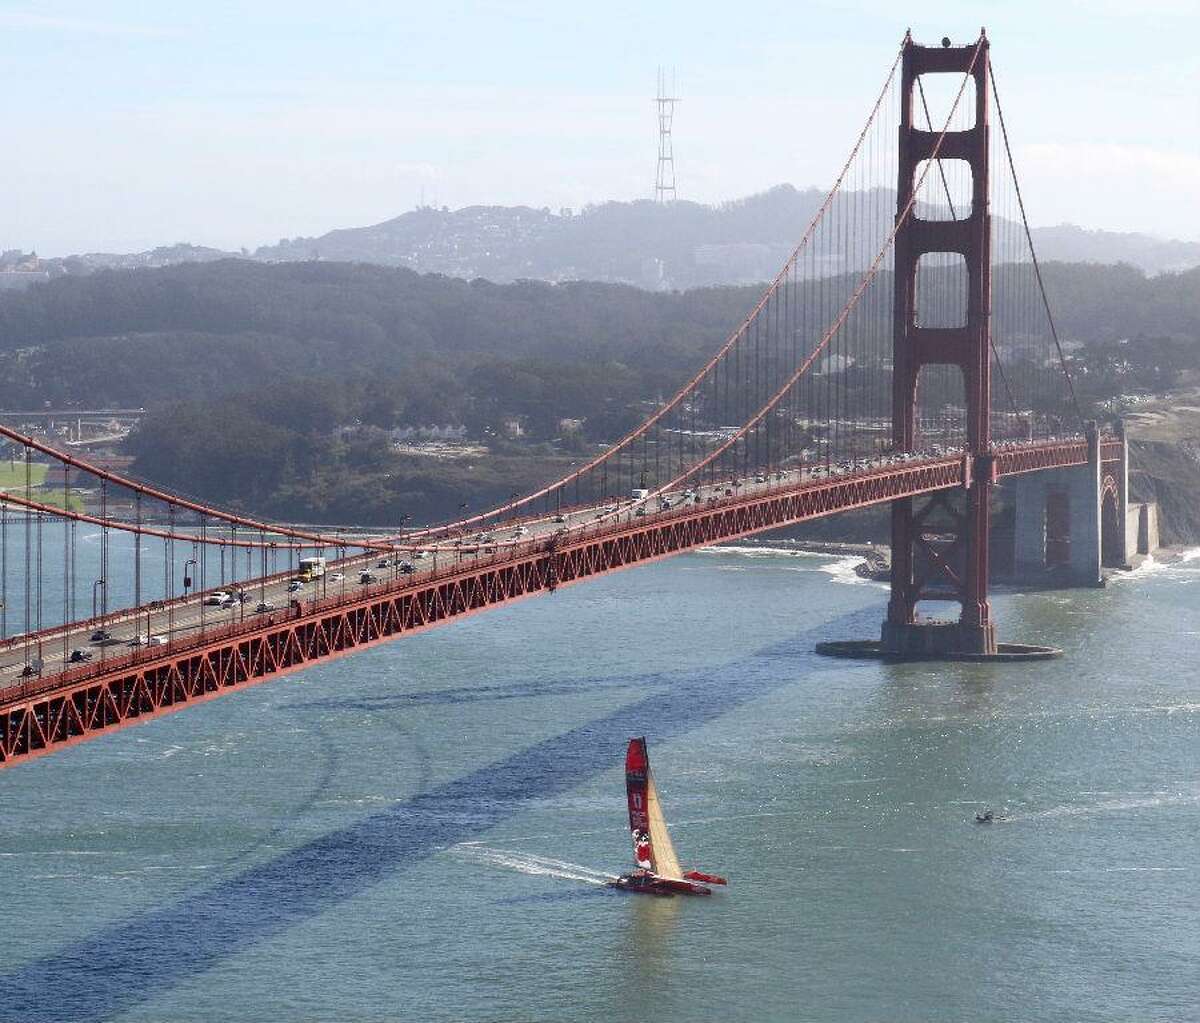 Guo Chuan was trying to break the world record of sailing from San Francisco to Shanghai in fewer than 21 days. He departed the city Oct. 18 and is now missing at sea, according to the Coast Guard.